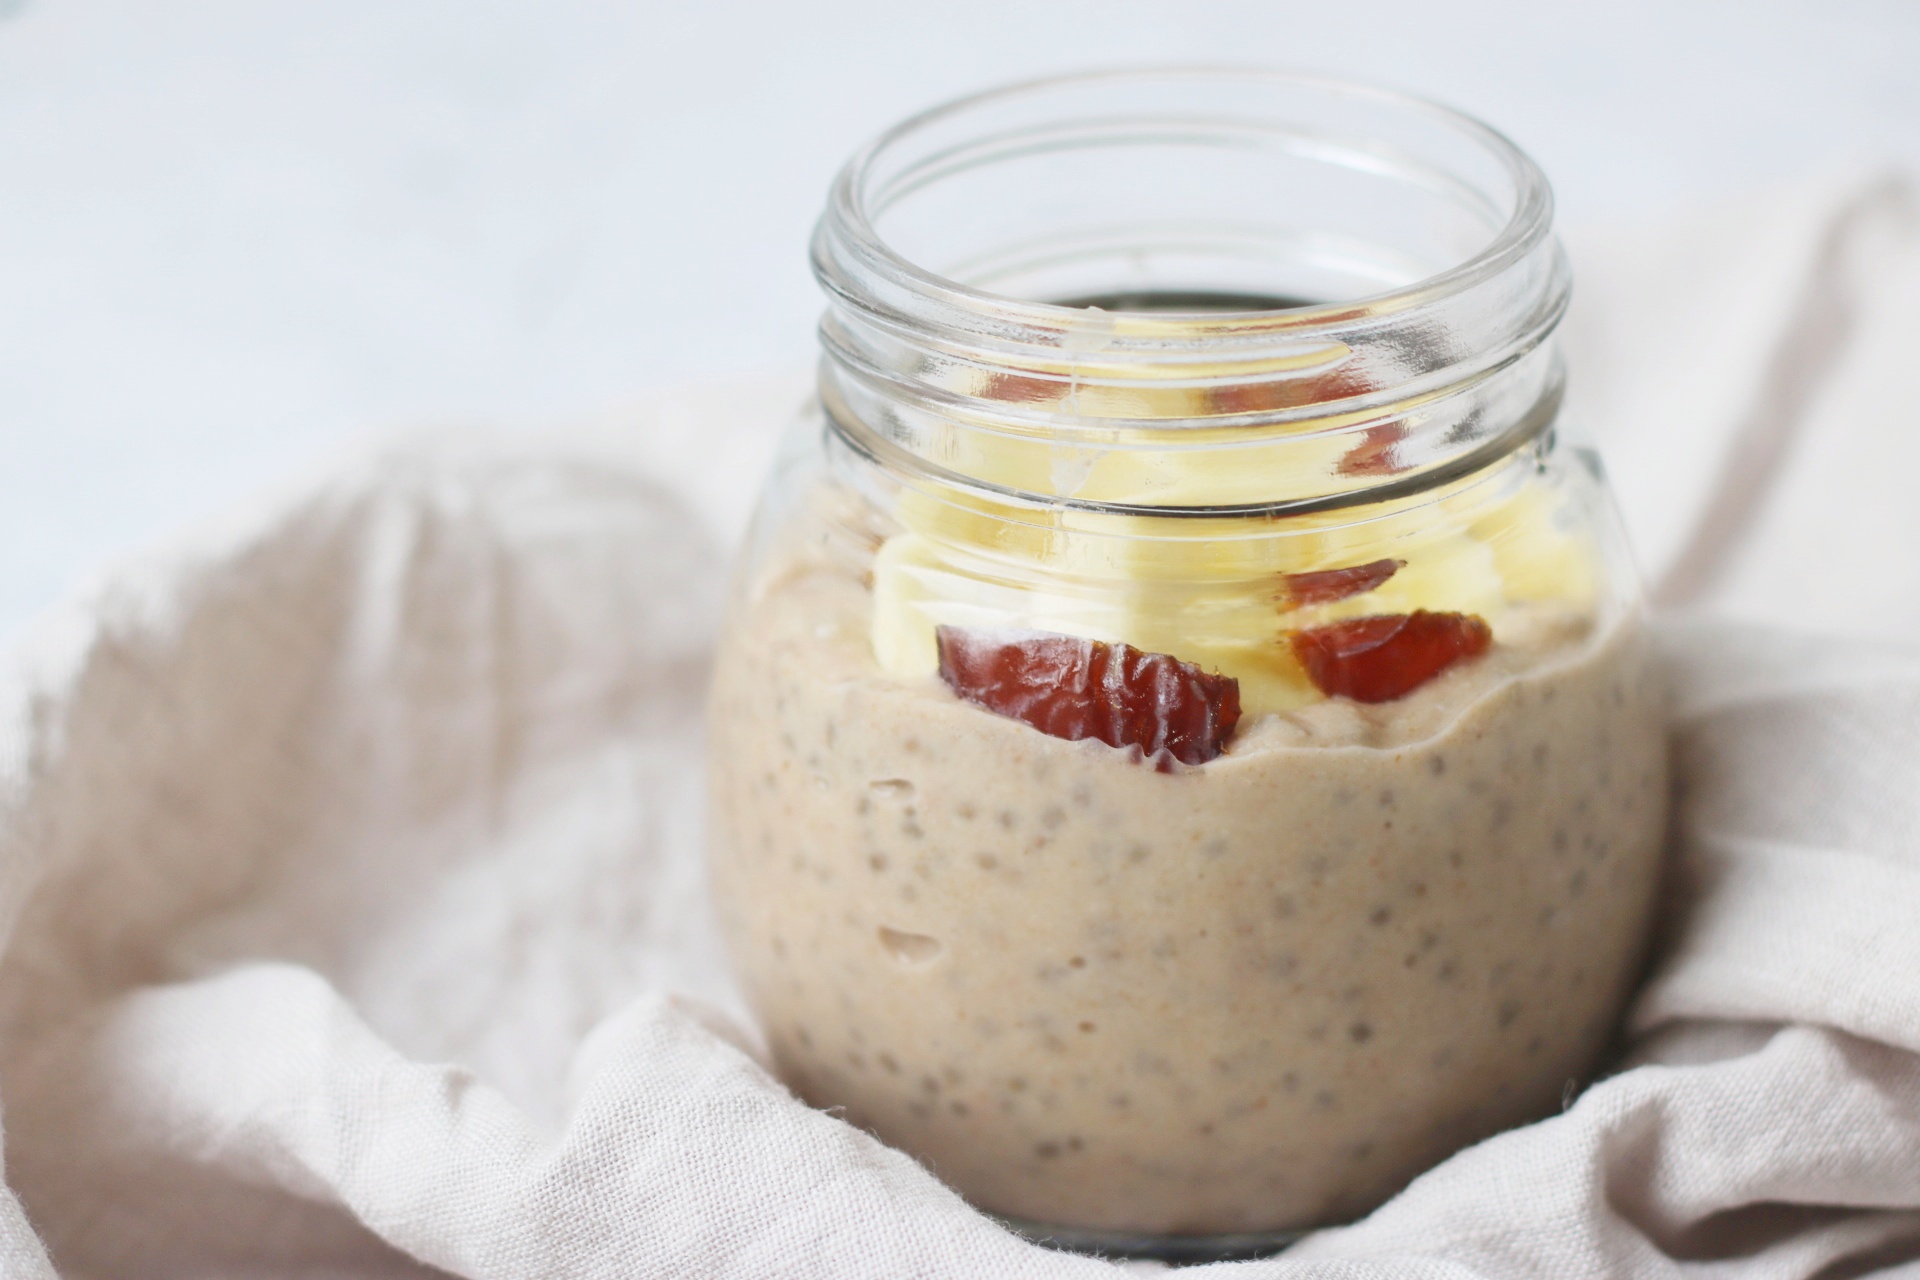 https://supperinthesuburbs.com/wp-content/uploads/2022/01/A-jar-of-Banana-and-date-chia-pudding.jpeg